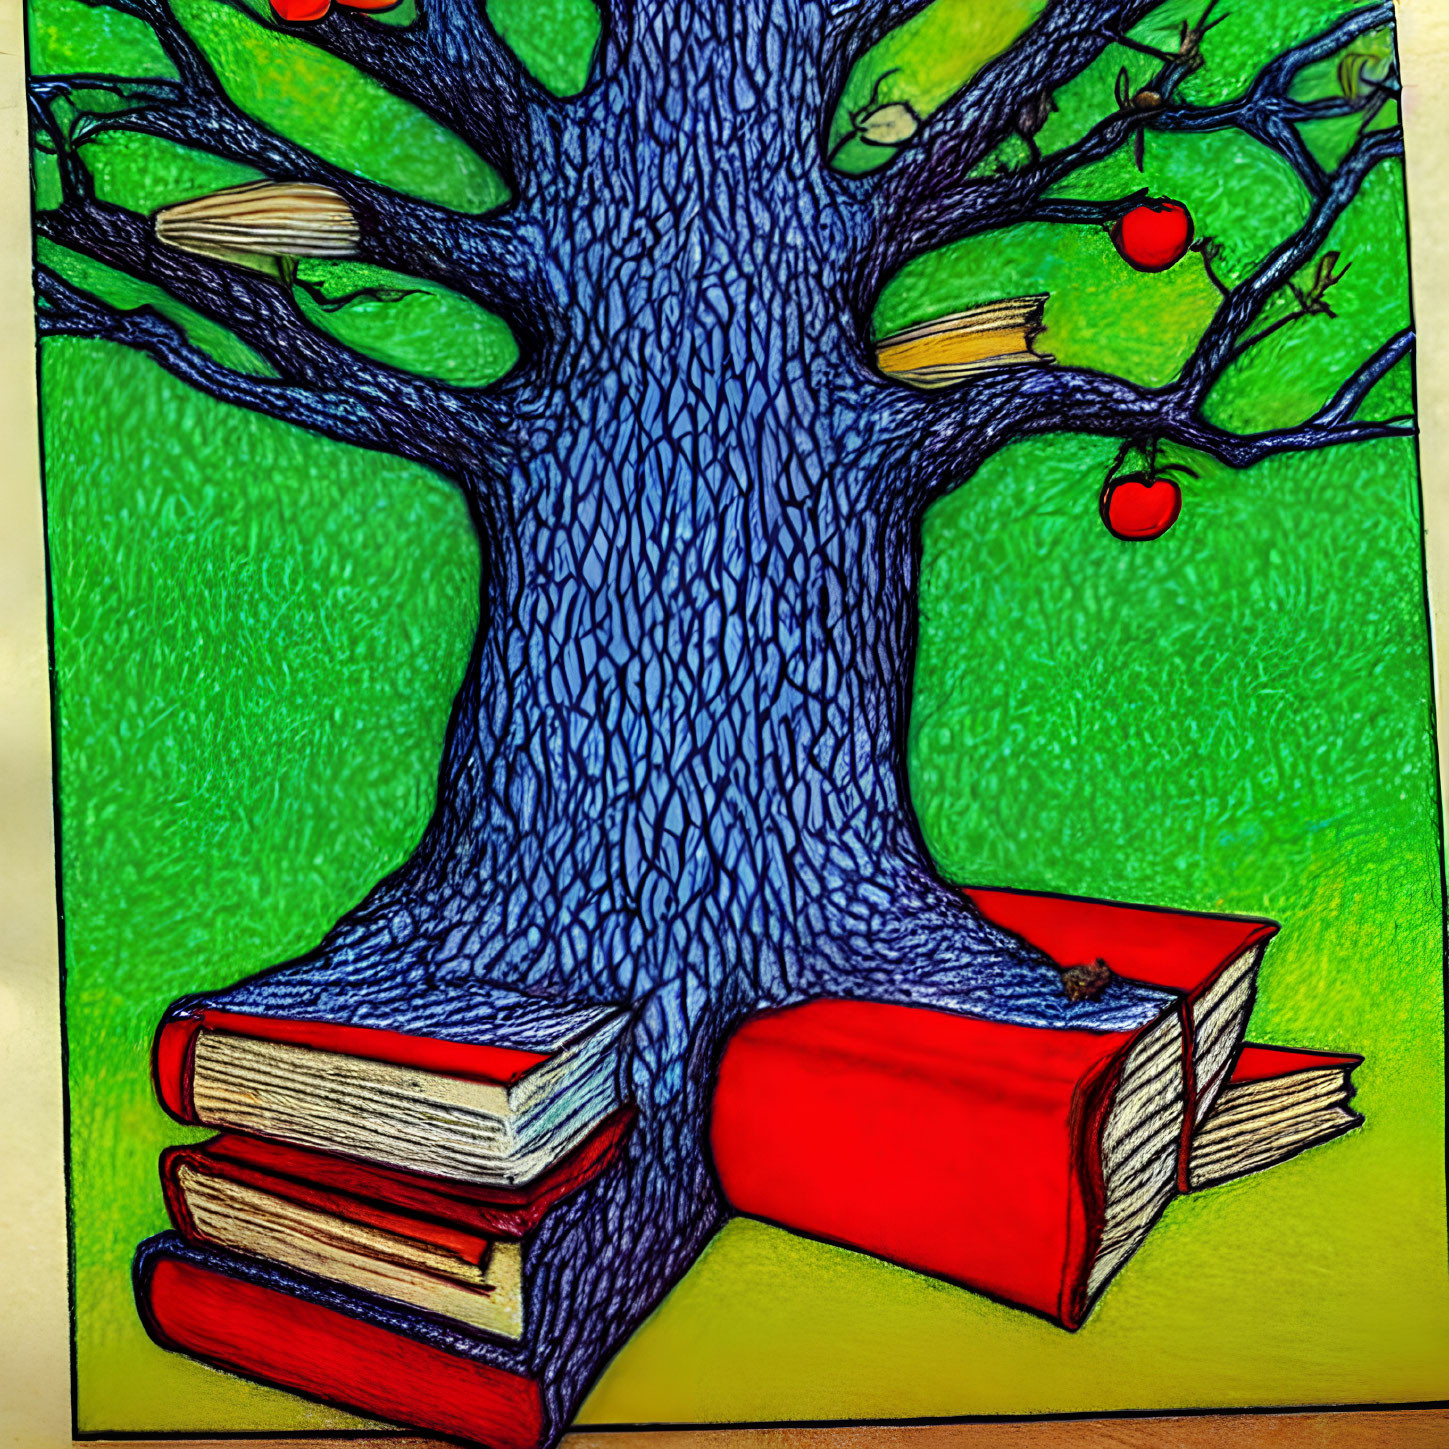 Tree-themed artwork with book spines and red apples on green backdrop